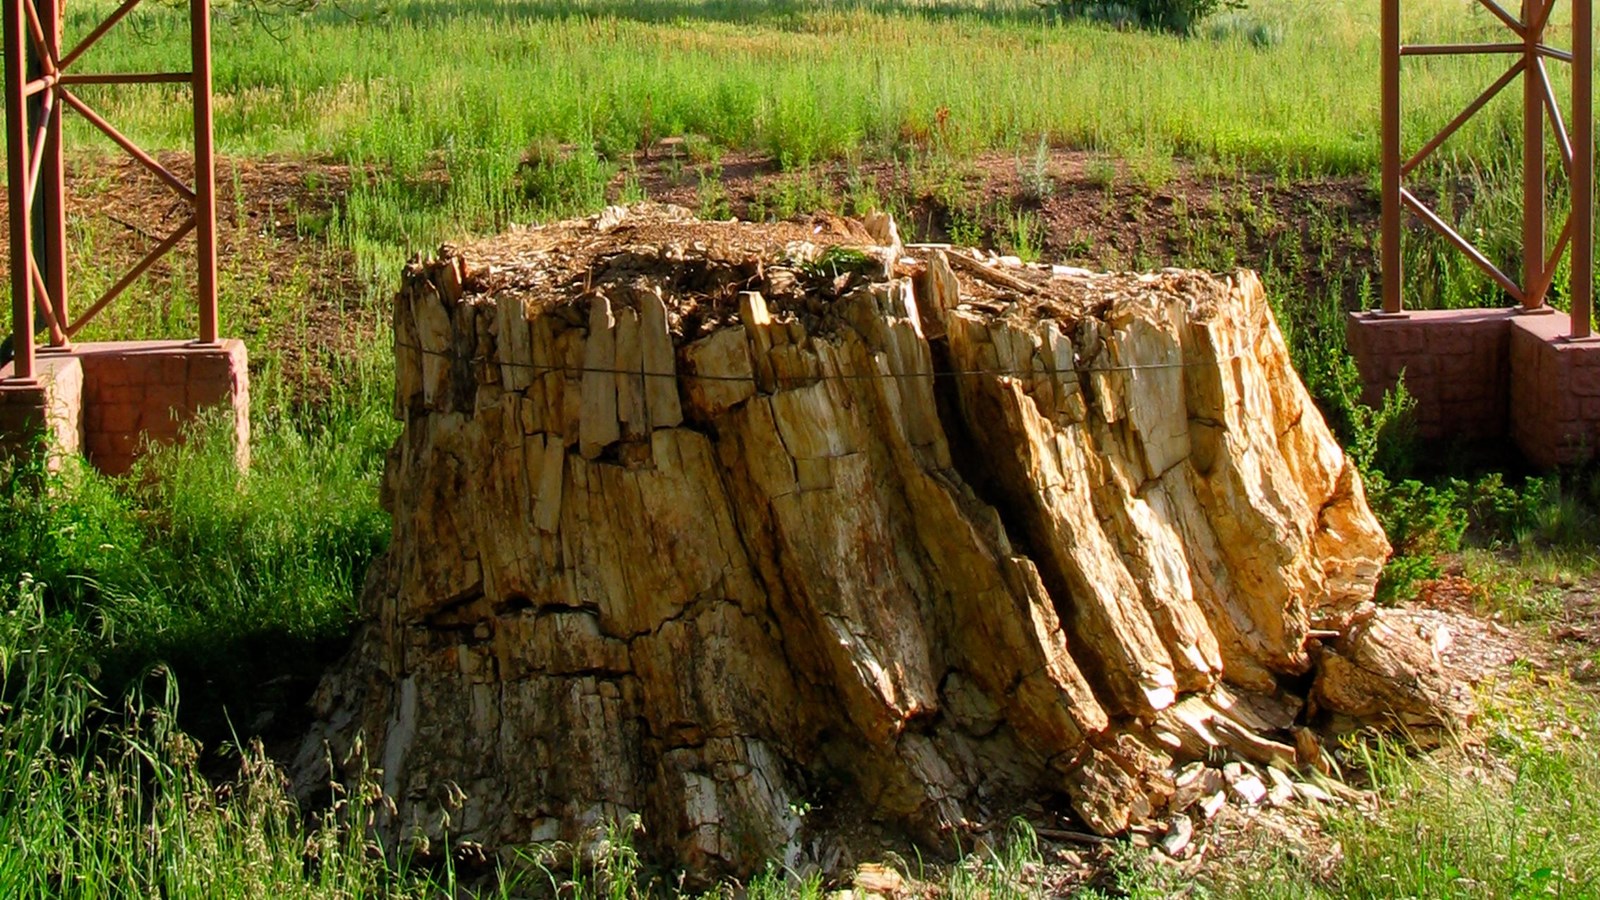 A 12 foot wide, 10 foot tall petrified tree stump is covered by a metal roof shelter